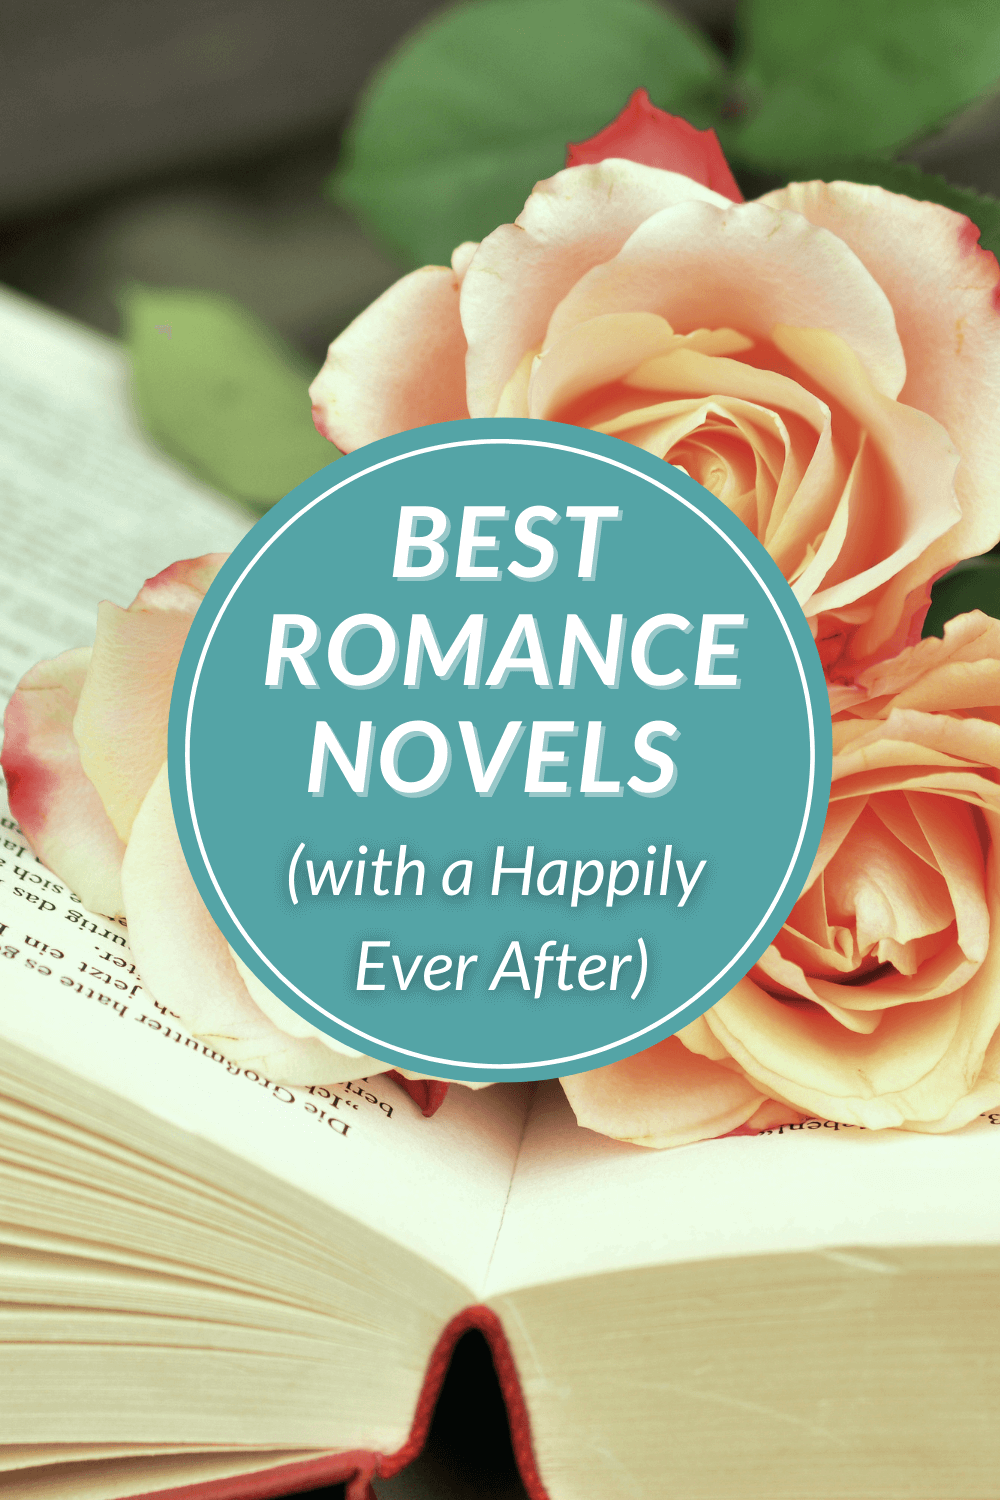 An open book with three pale pink roses is set behind the title, "Best Romance Novels (with a Happily Ever After)